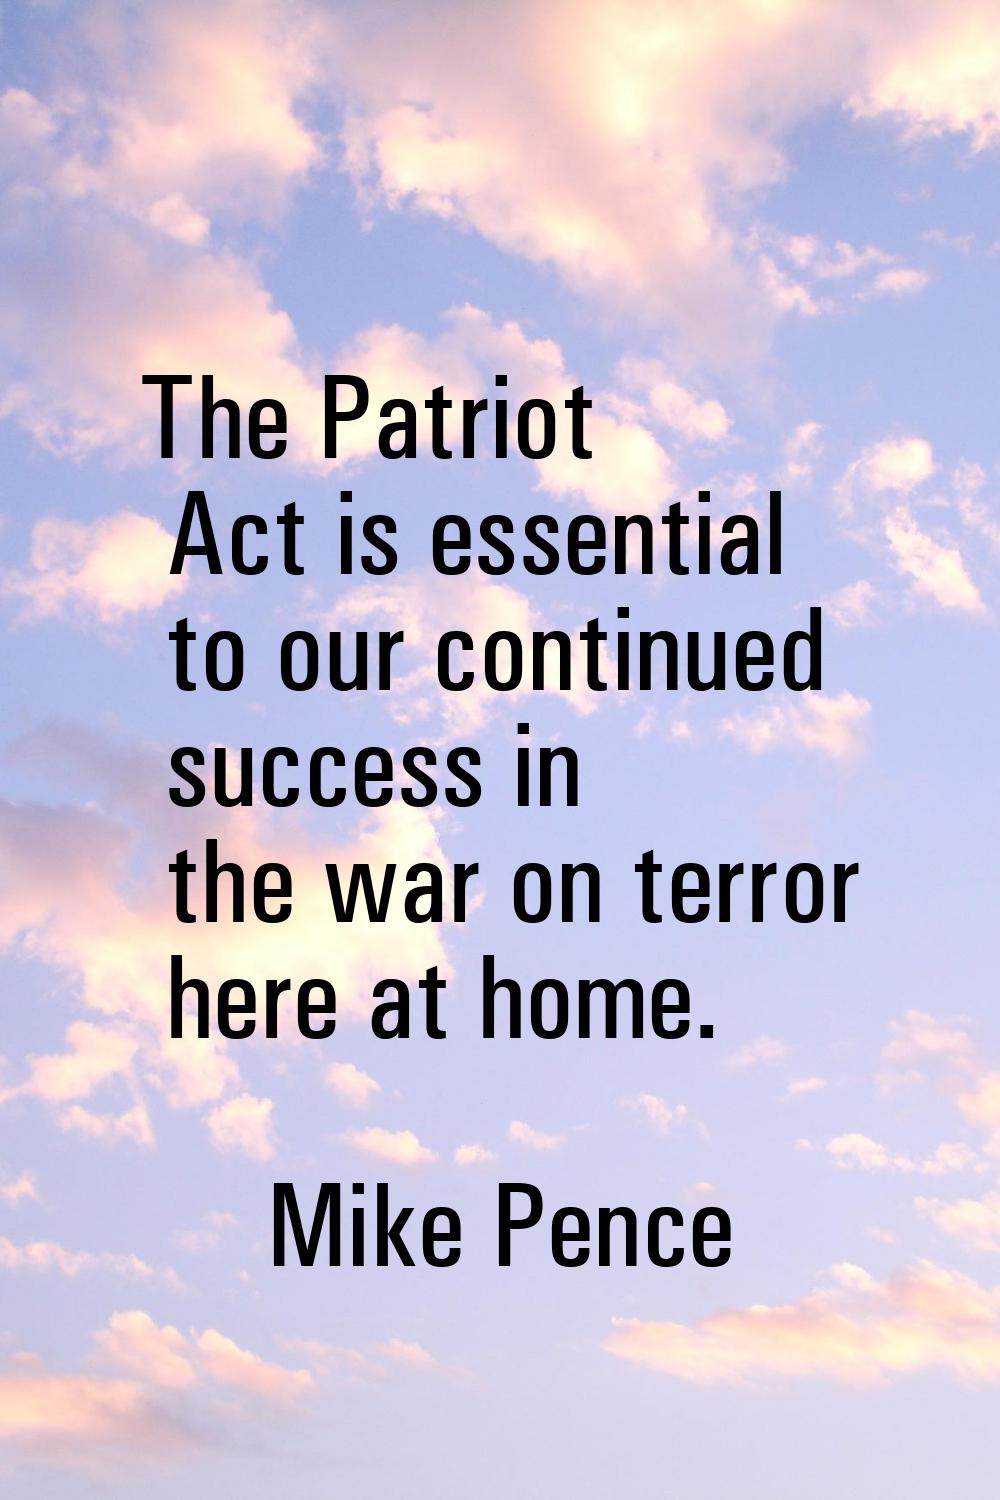 The Patriot Act is essential to our continued success in the war on terror here at home.